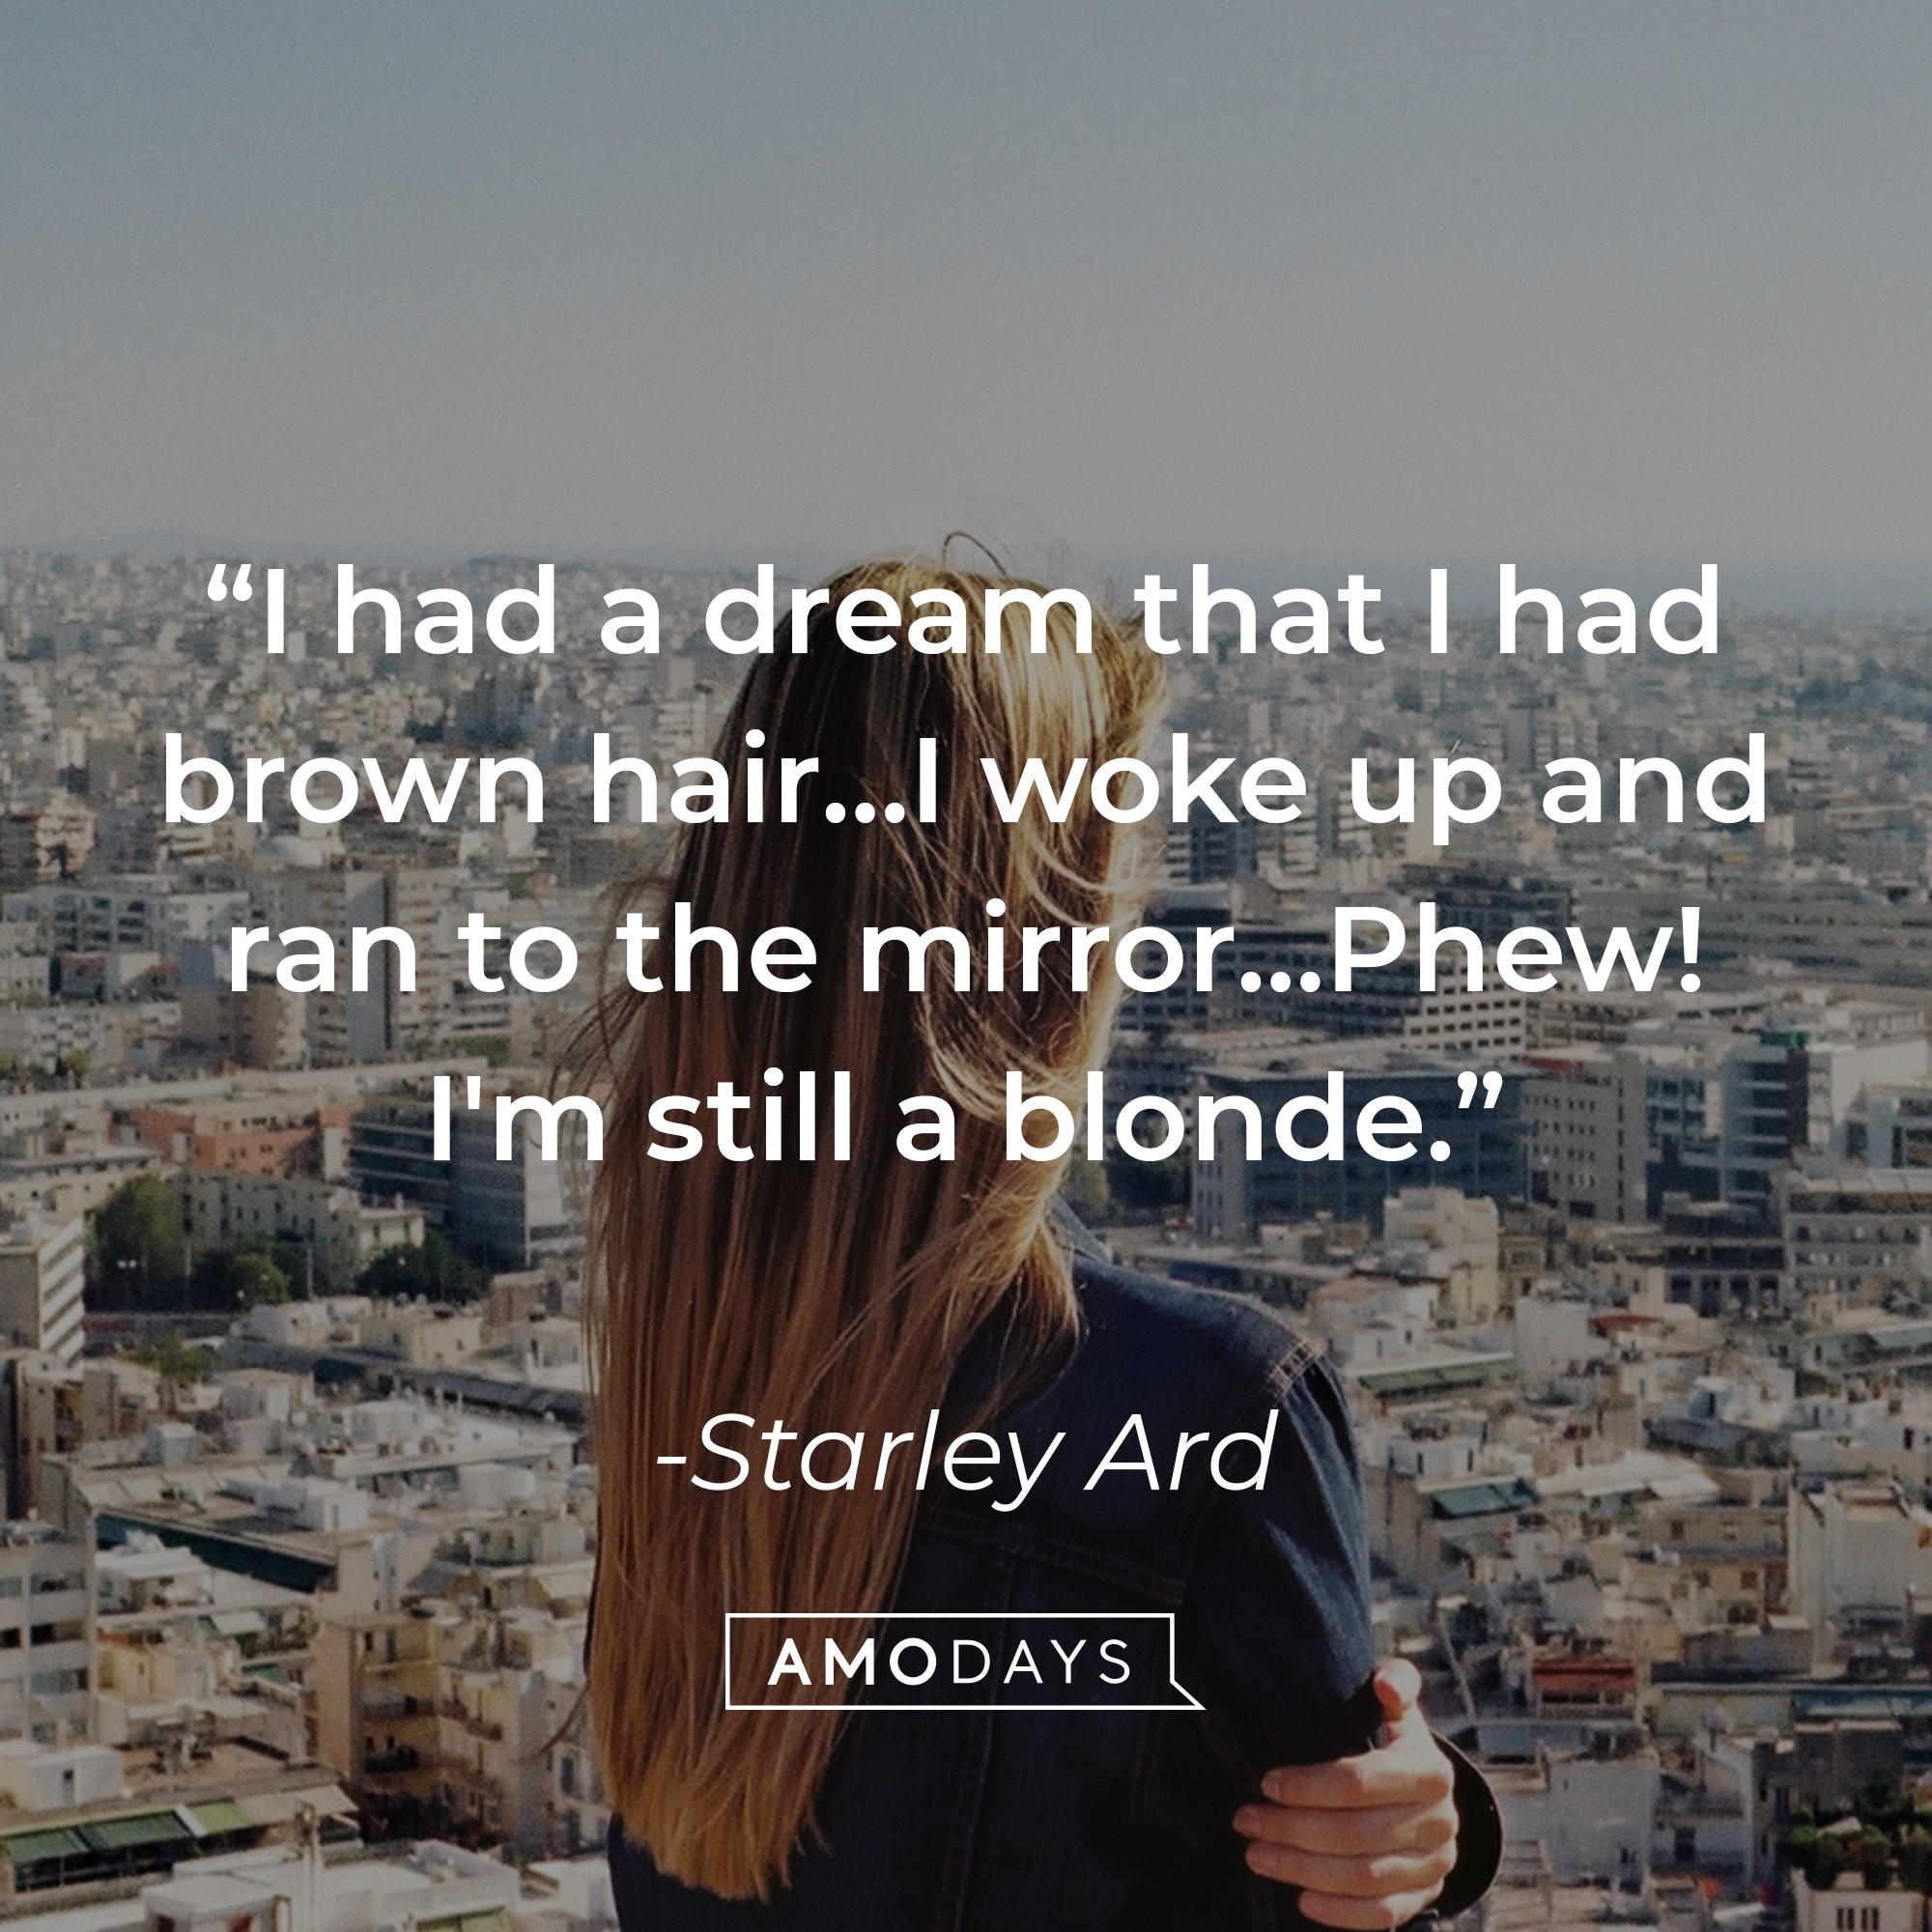  Starley Ard ‘s quote: "I had a dream that I had brown hair…I woke up and ran to the mirror…Phew! I'm still a blonde." | Image: AmoDays